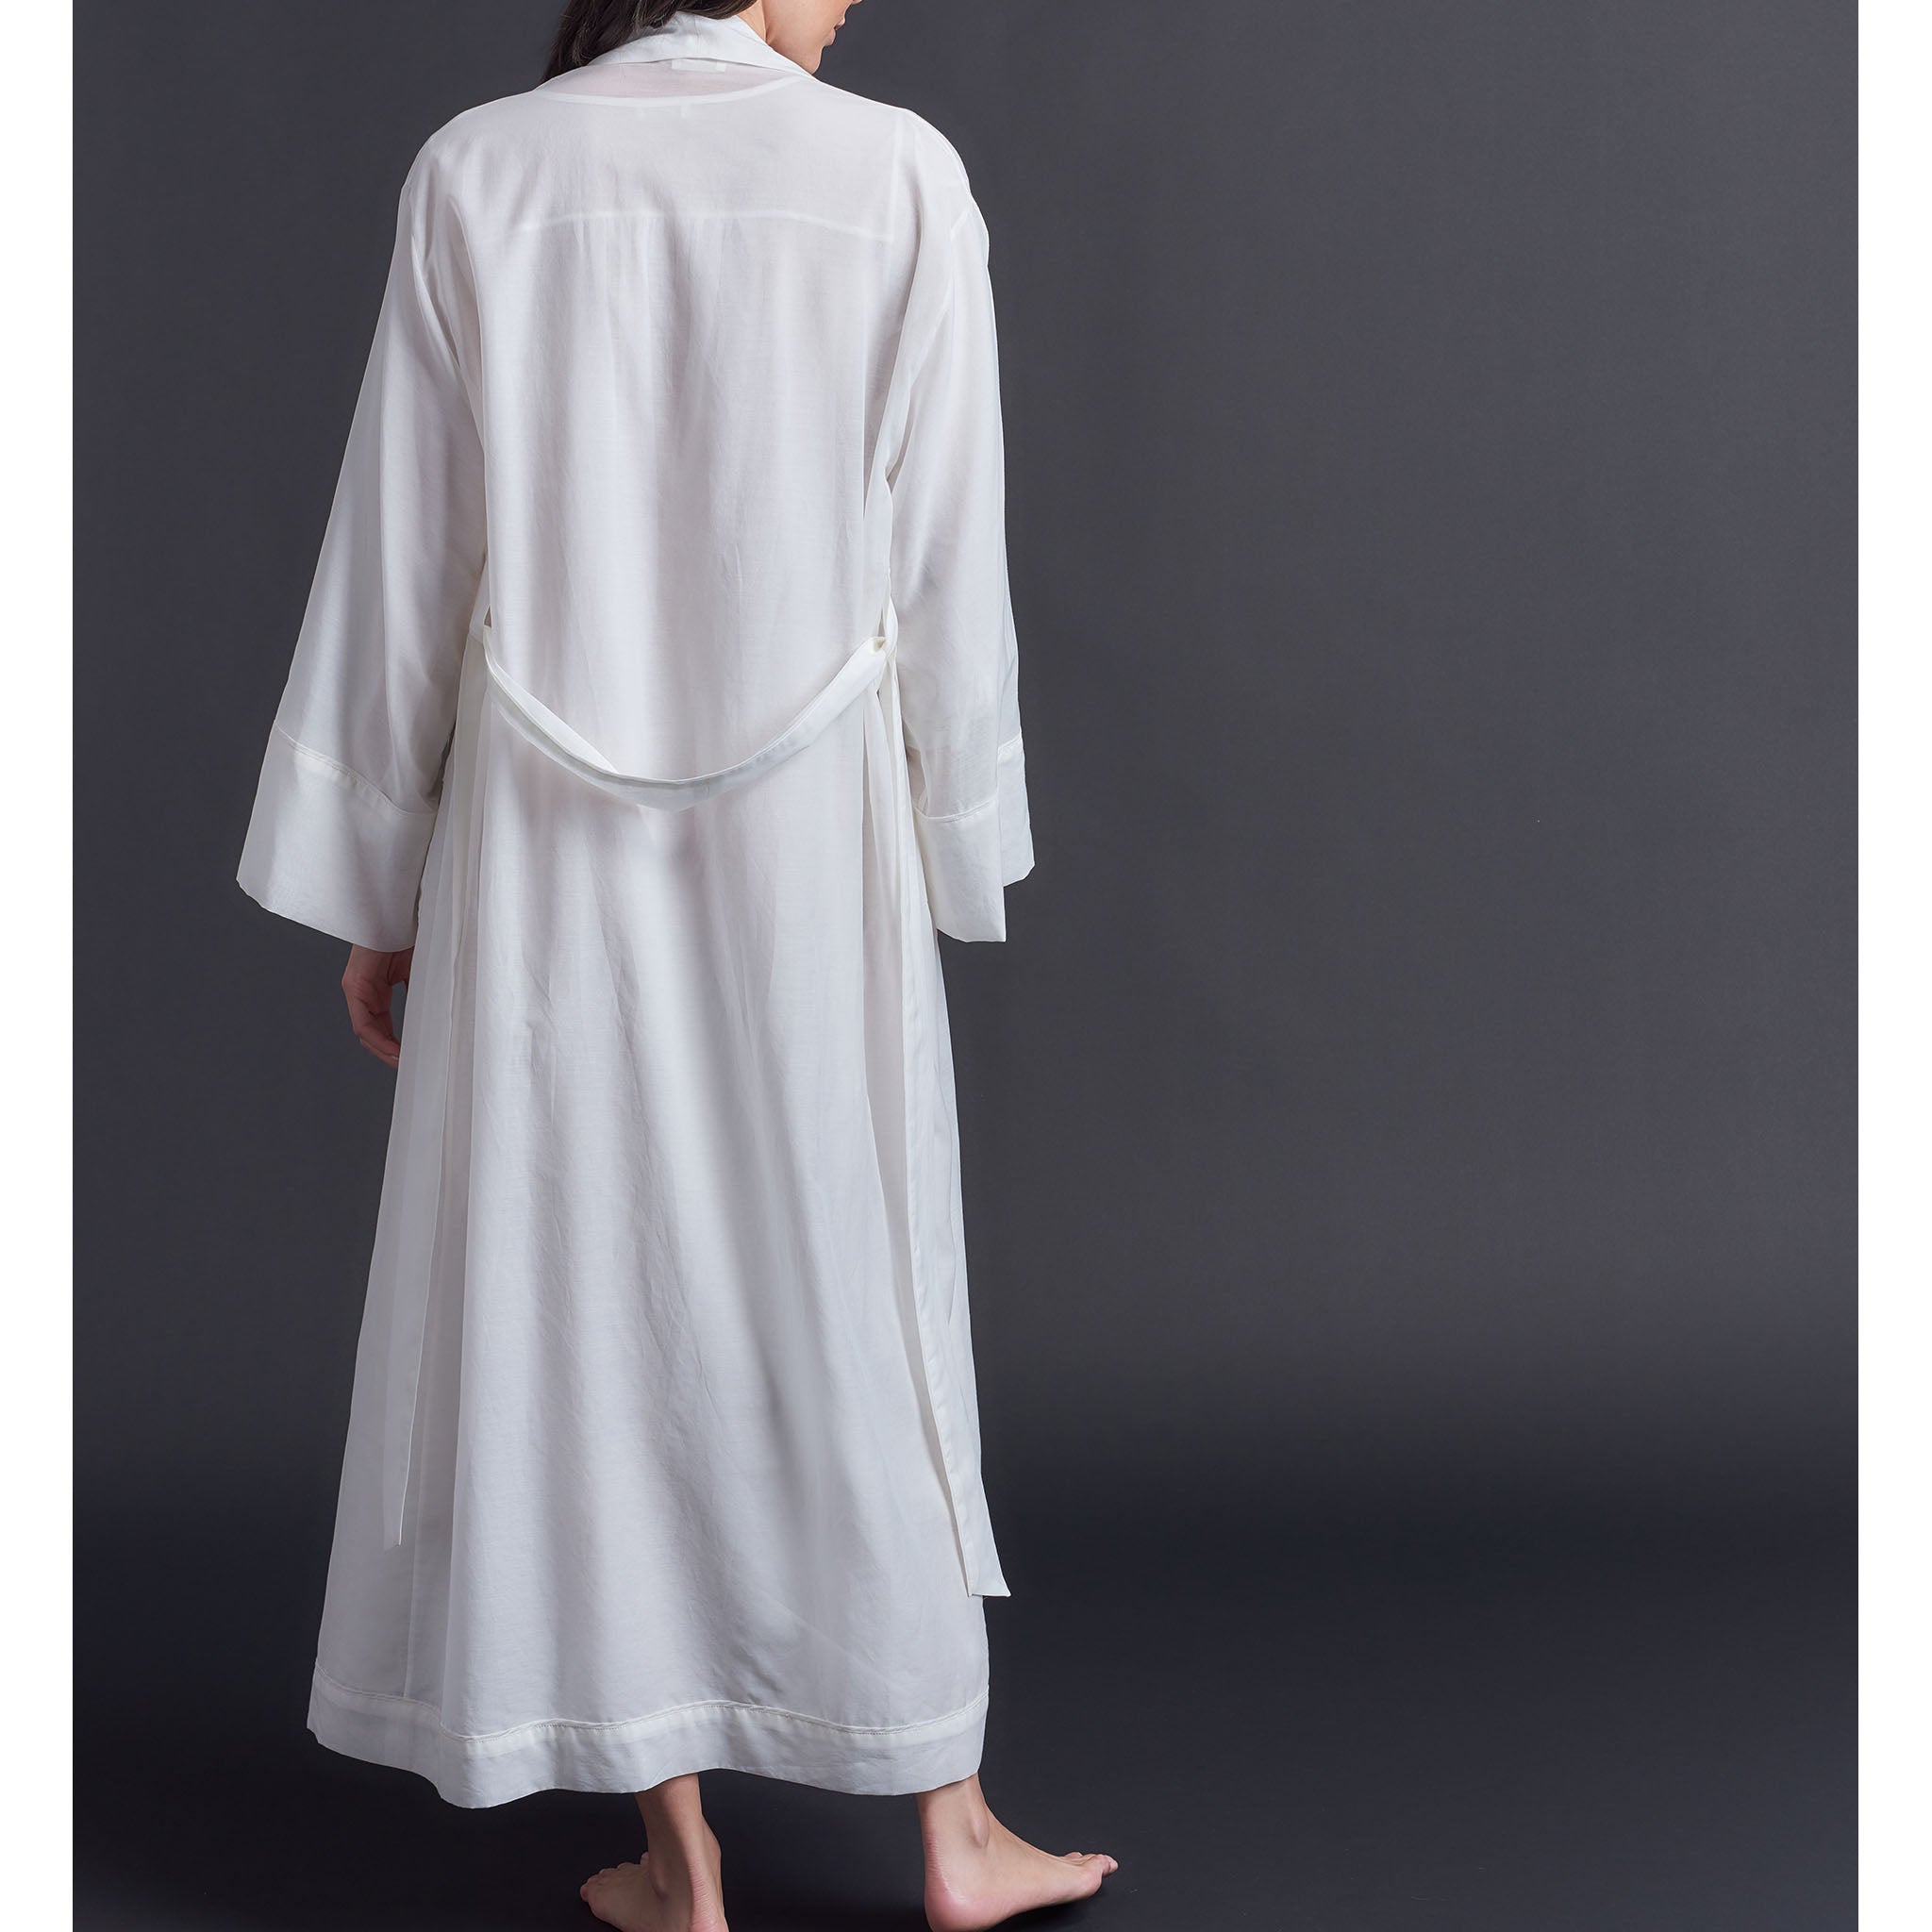 Long Claudette Robe in Pearl Silk Cotton Voile